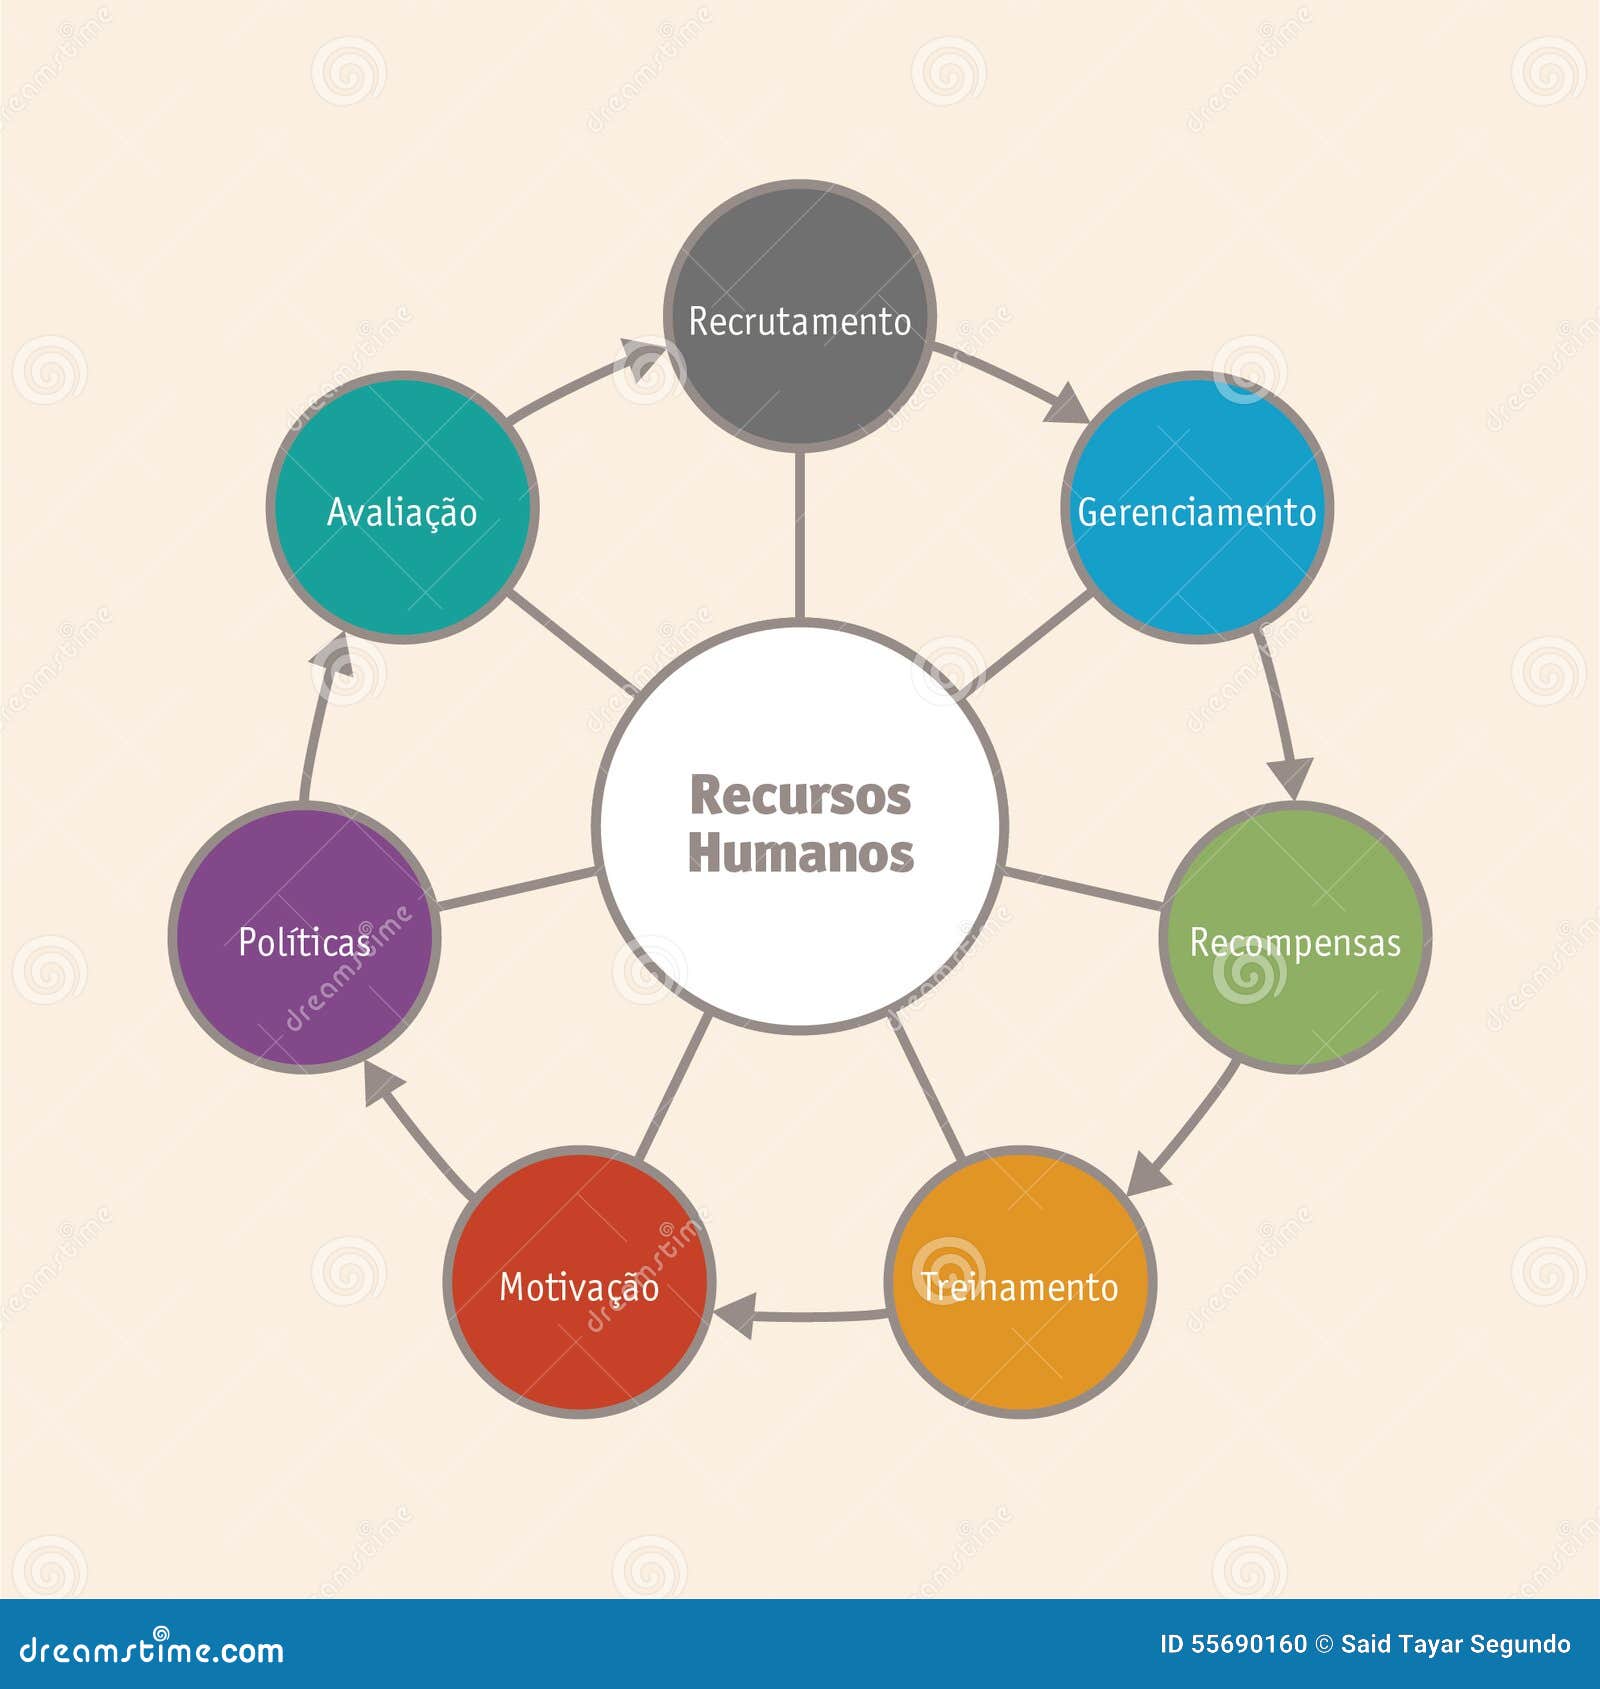 human resources cycle (portuguese version)